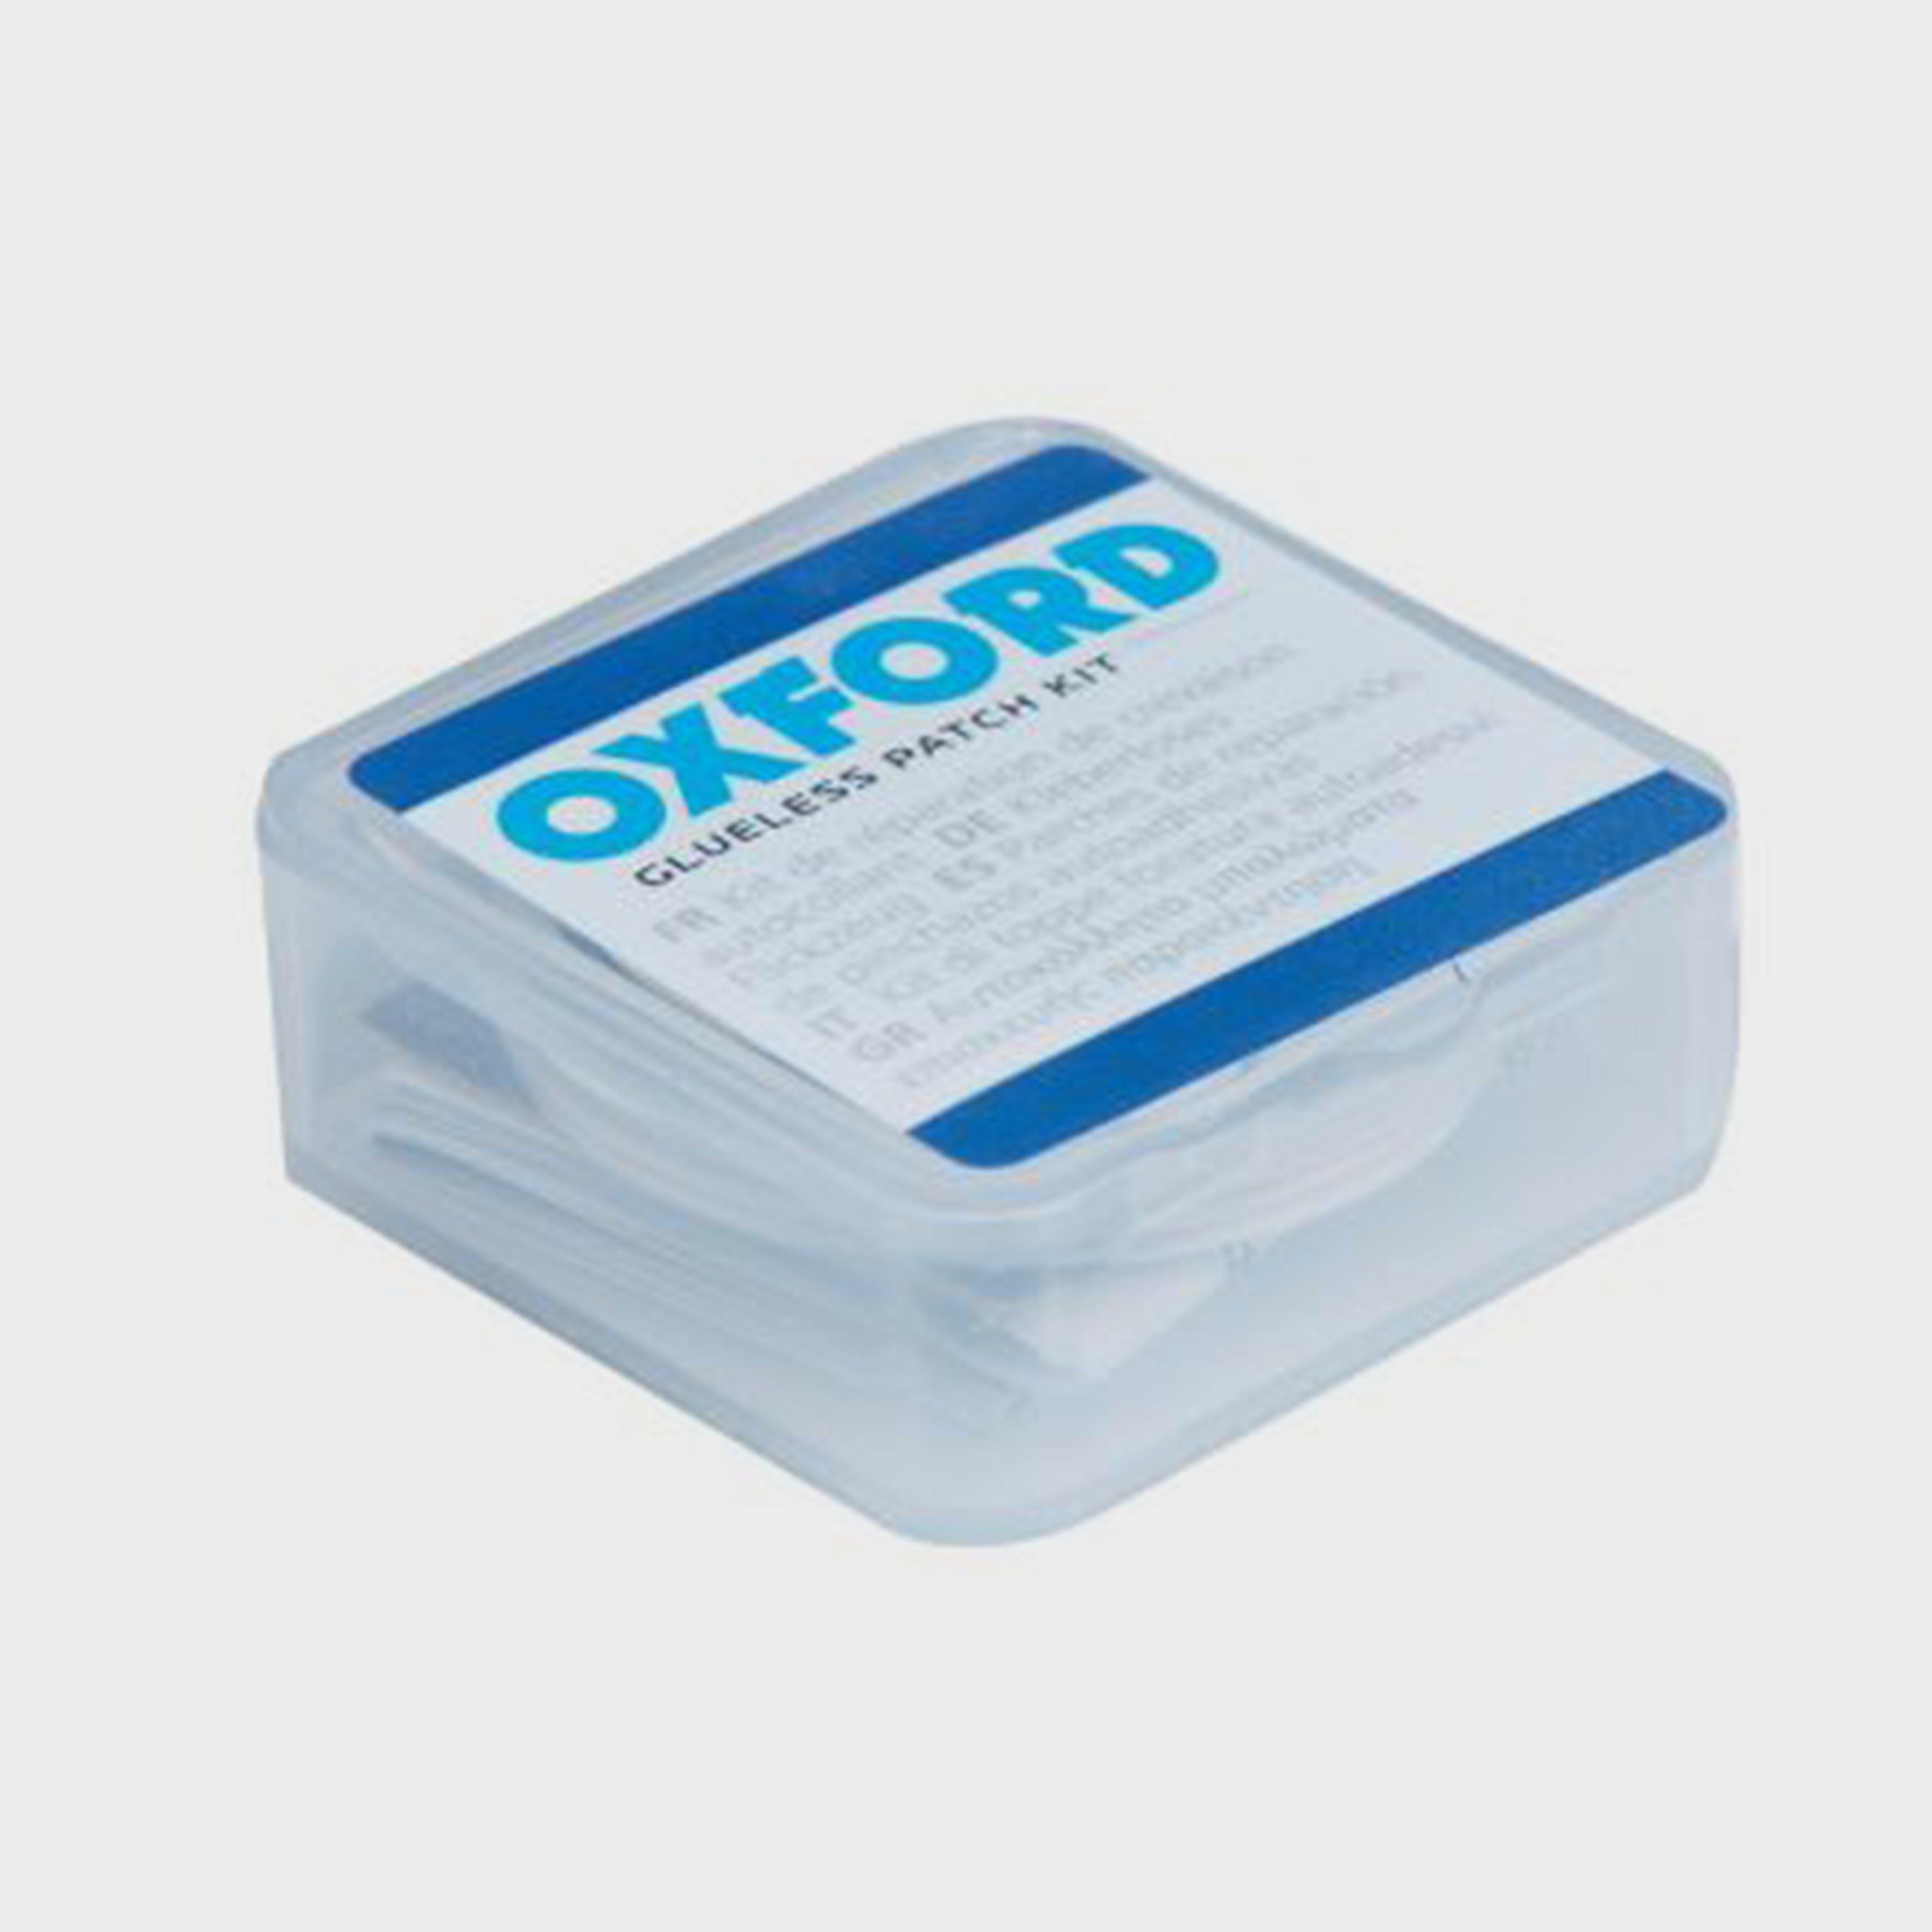 Go Outdoors Oxford Glueless Puncture Repair Glueless Kit